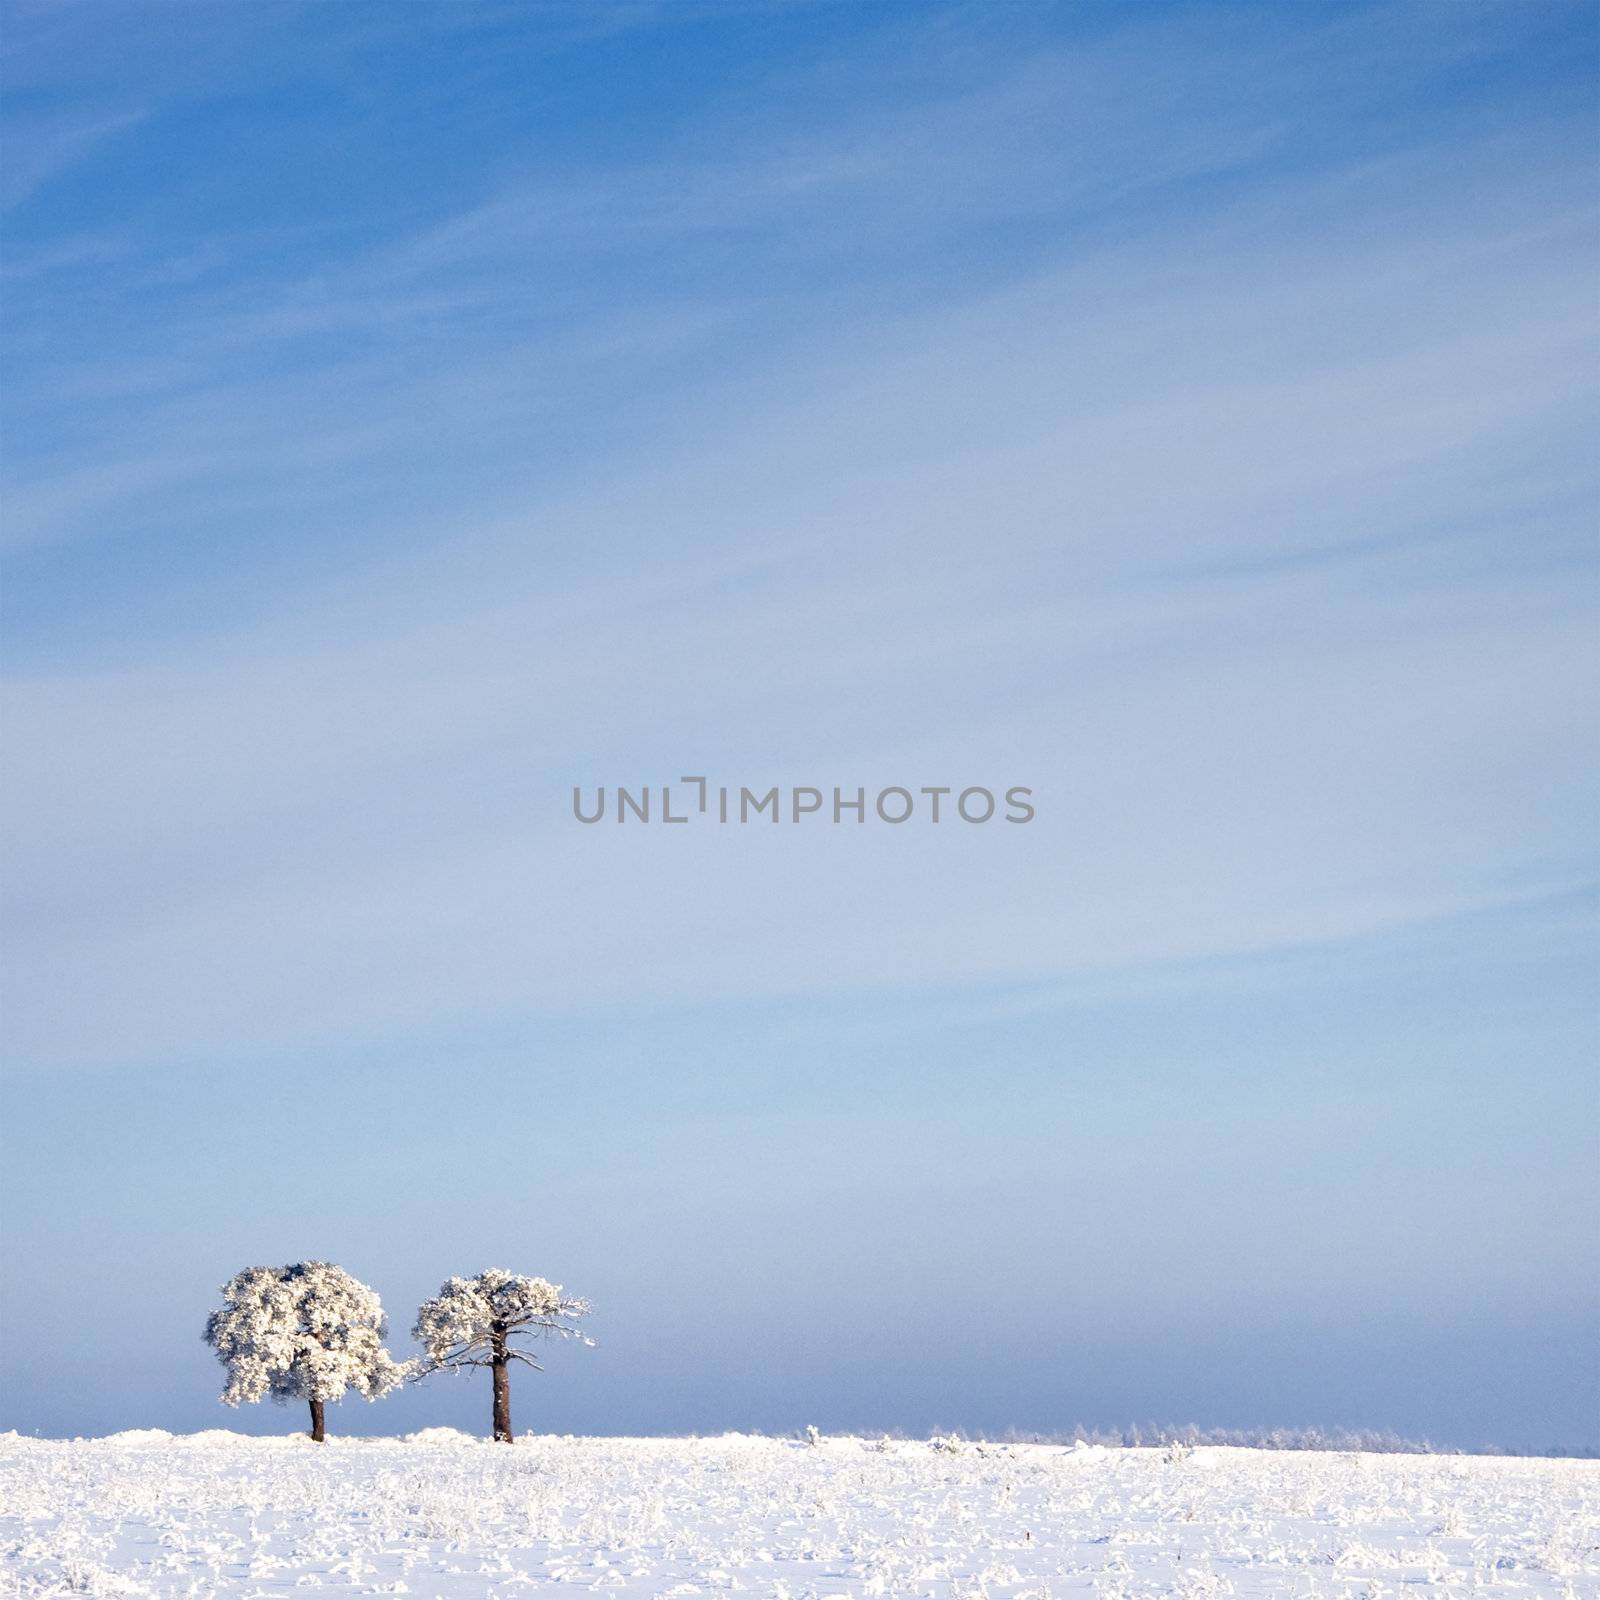 tree in frost and landscape in snow against blue sky. Winter scene